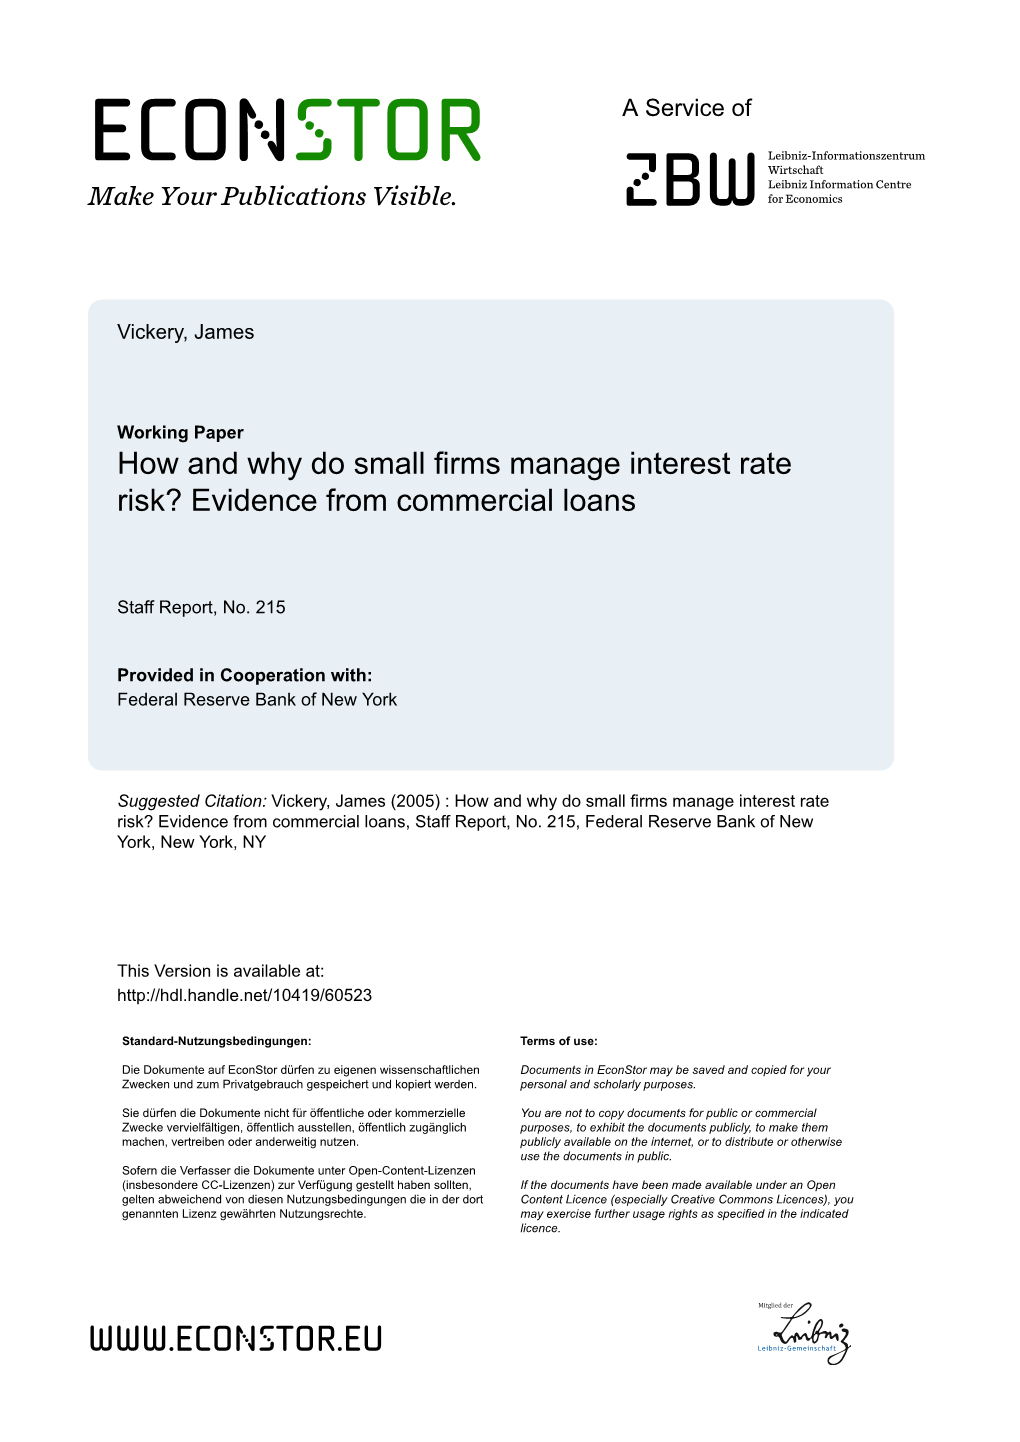 How and Why Do Small Firms Manage Interest Rate Risk? Evidence from Commercial Loans